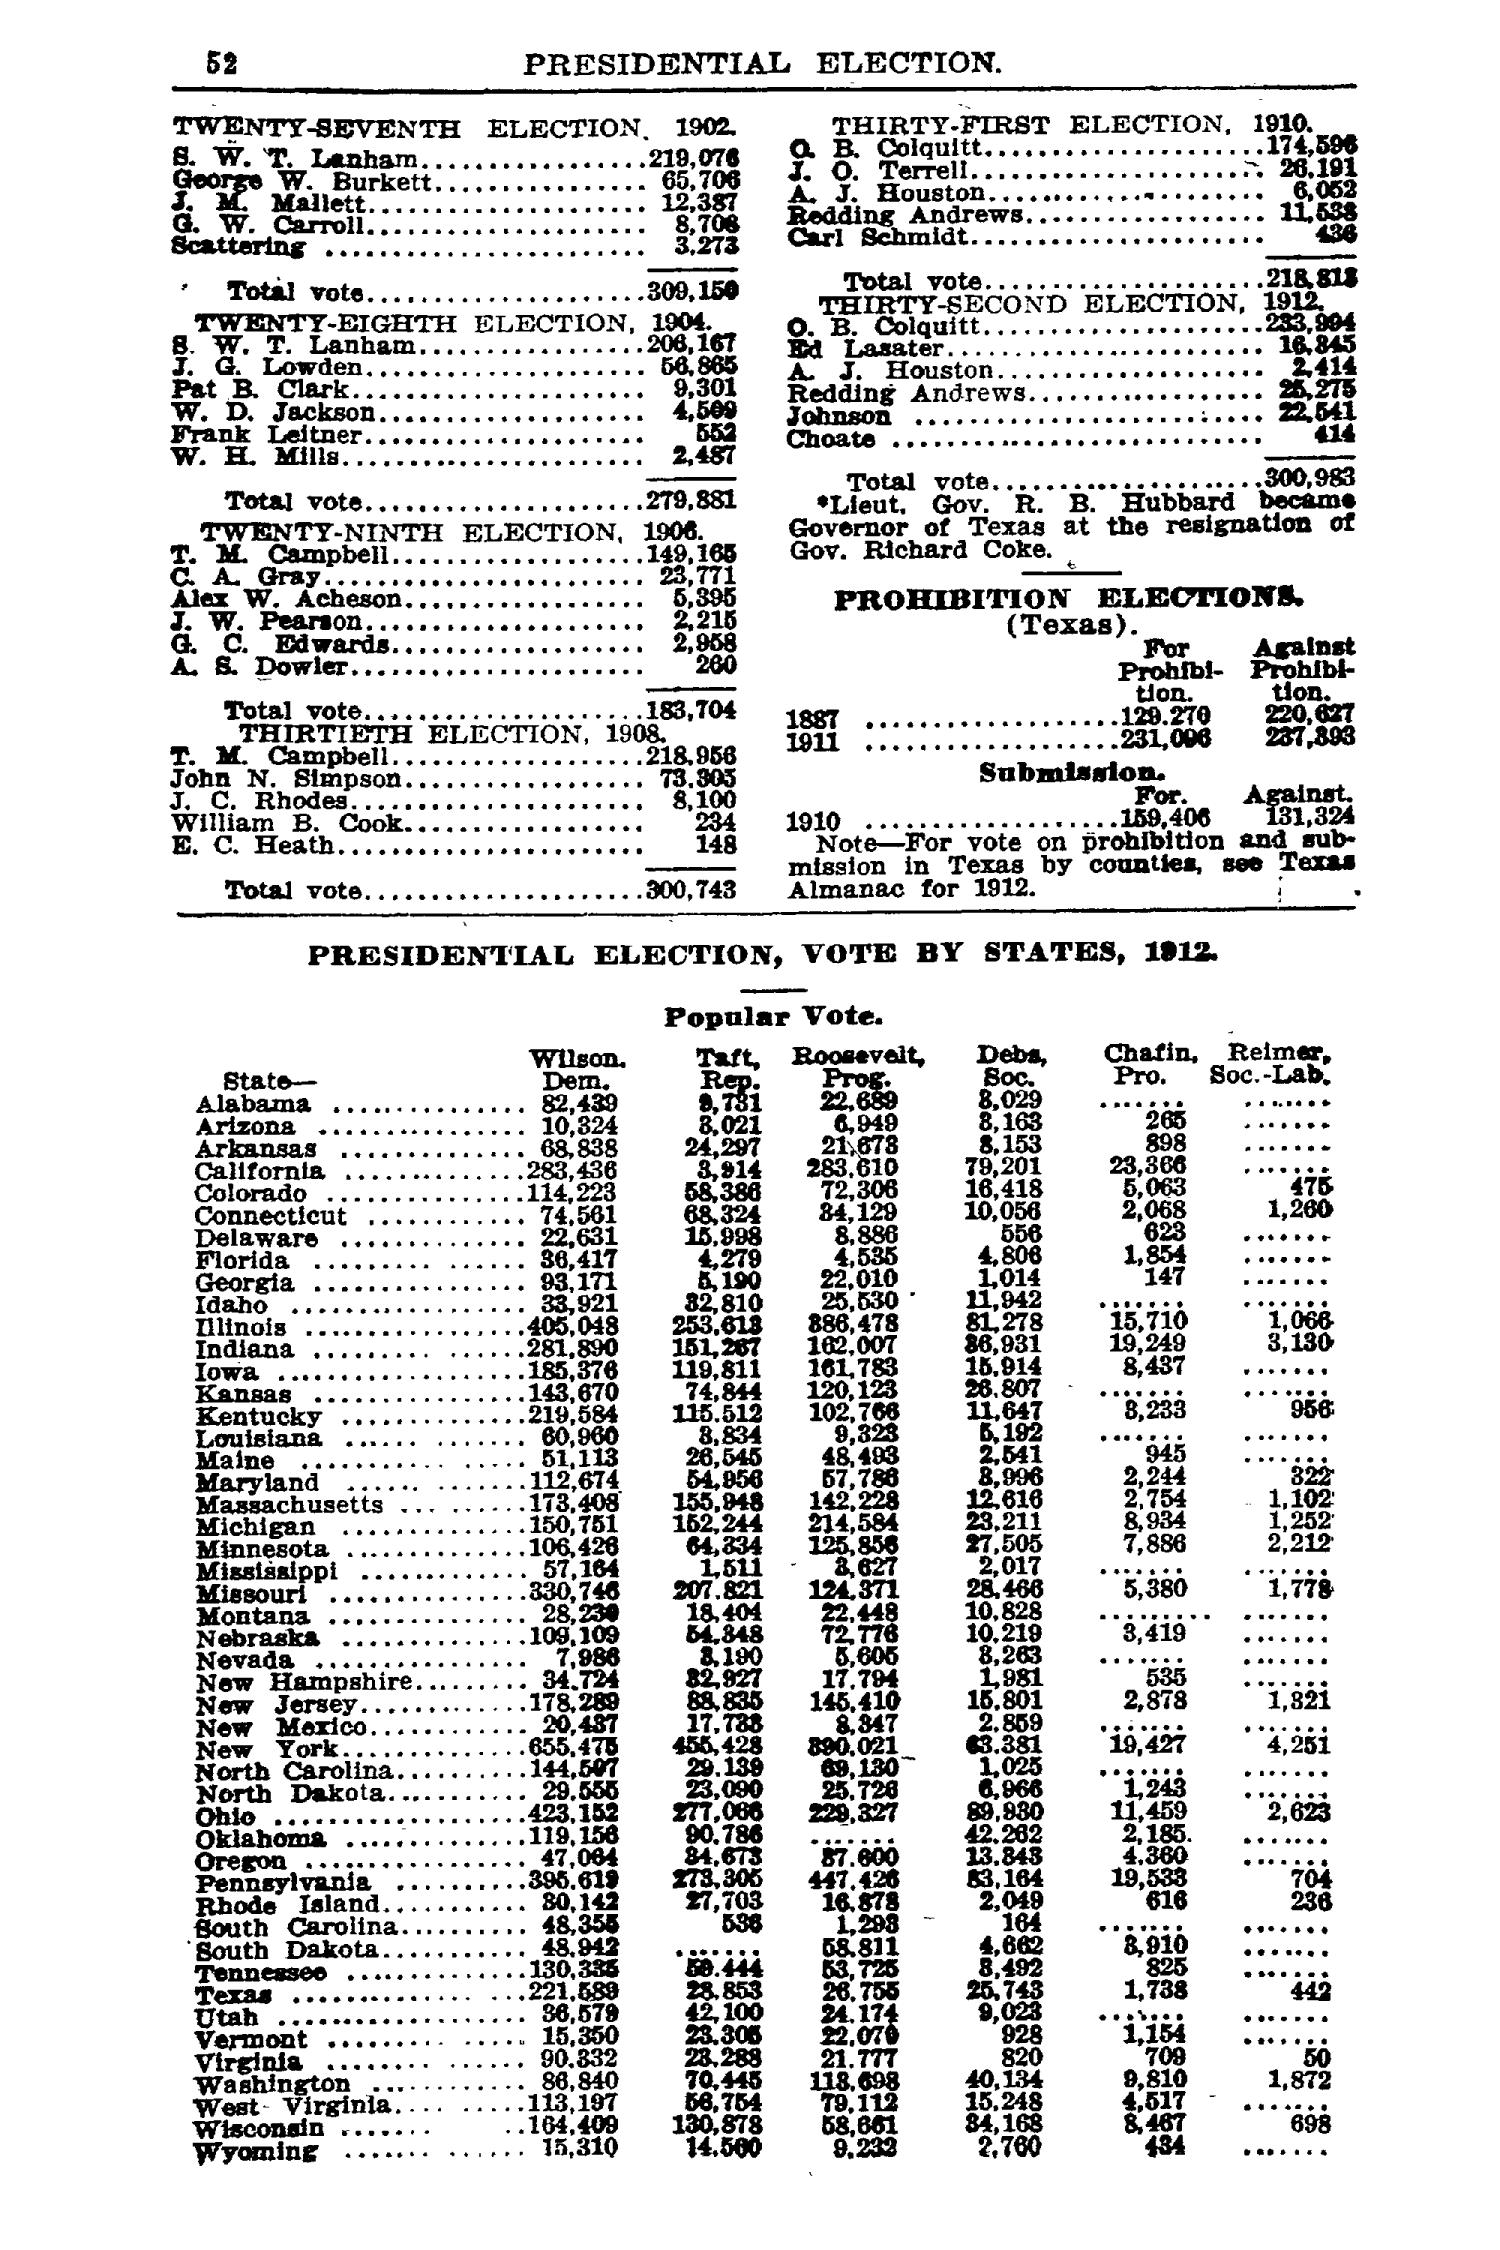 Texas Almanac and State Industrial Guide 1914
                                                
                                                    52
                                                